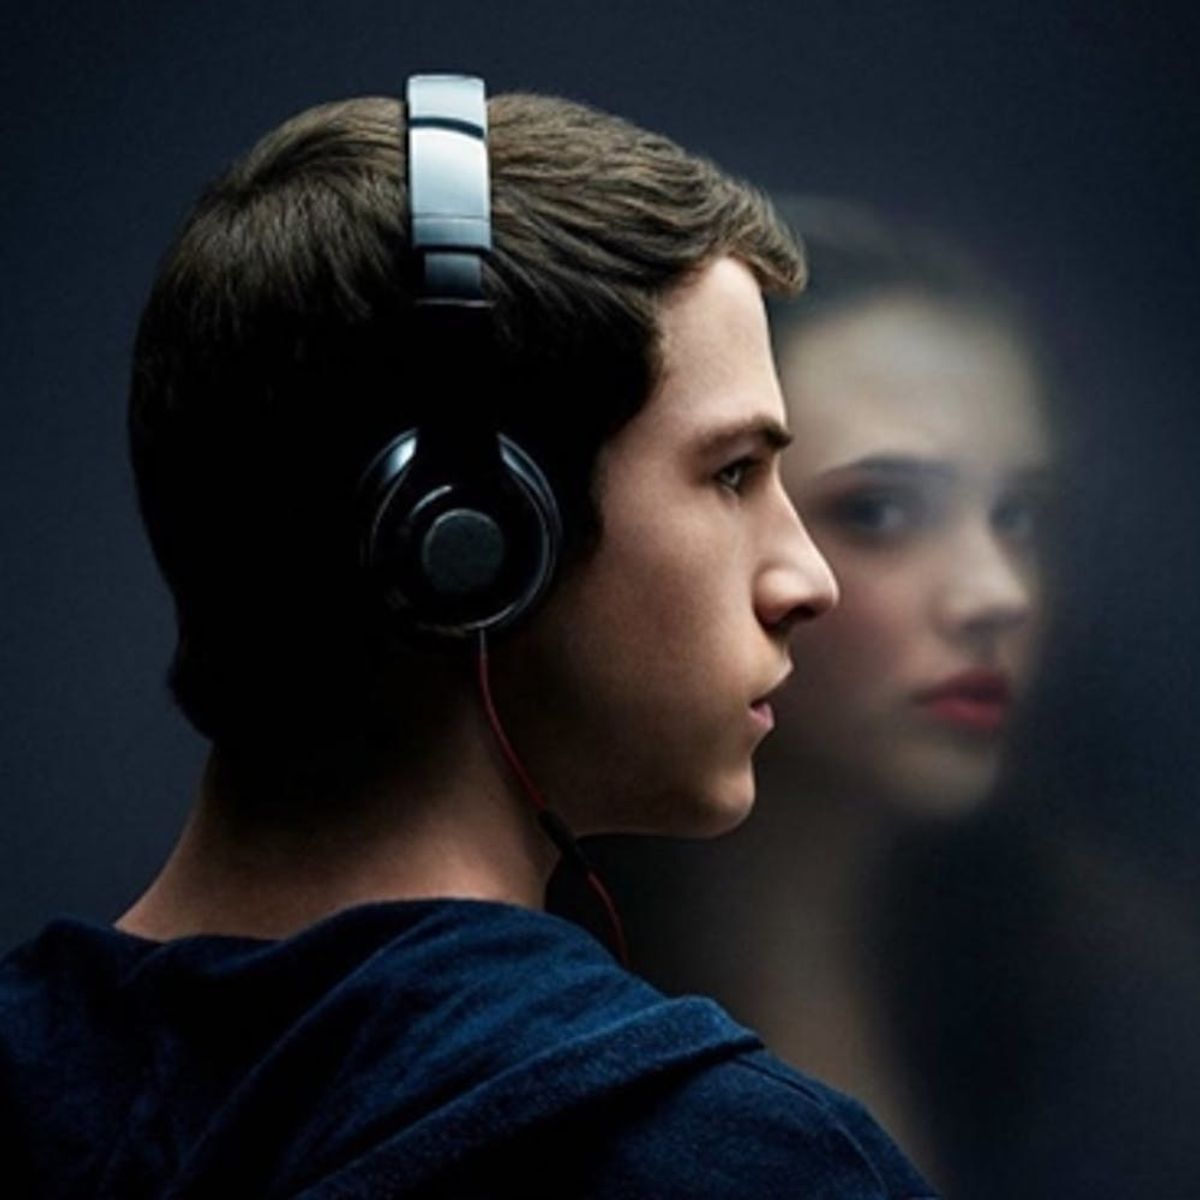 13 Reasons Why Is Facing Serious Backlash from Viewers AND Suicide Prevention Groups